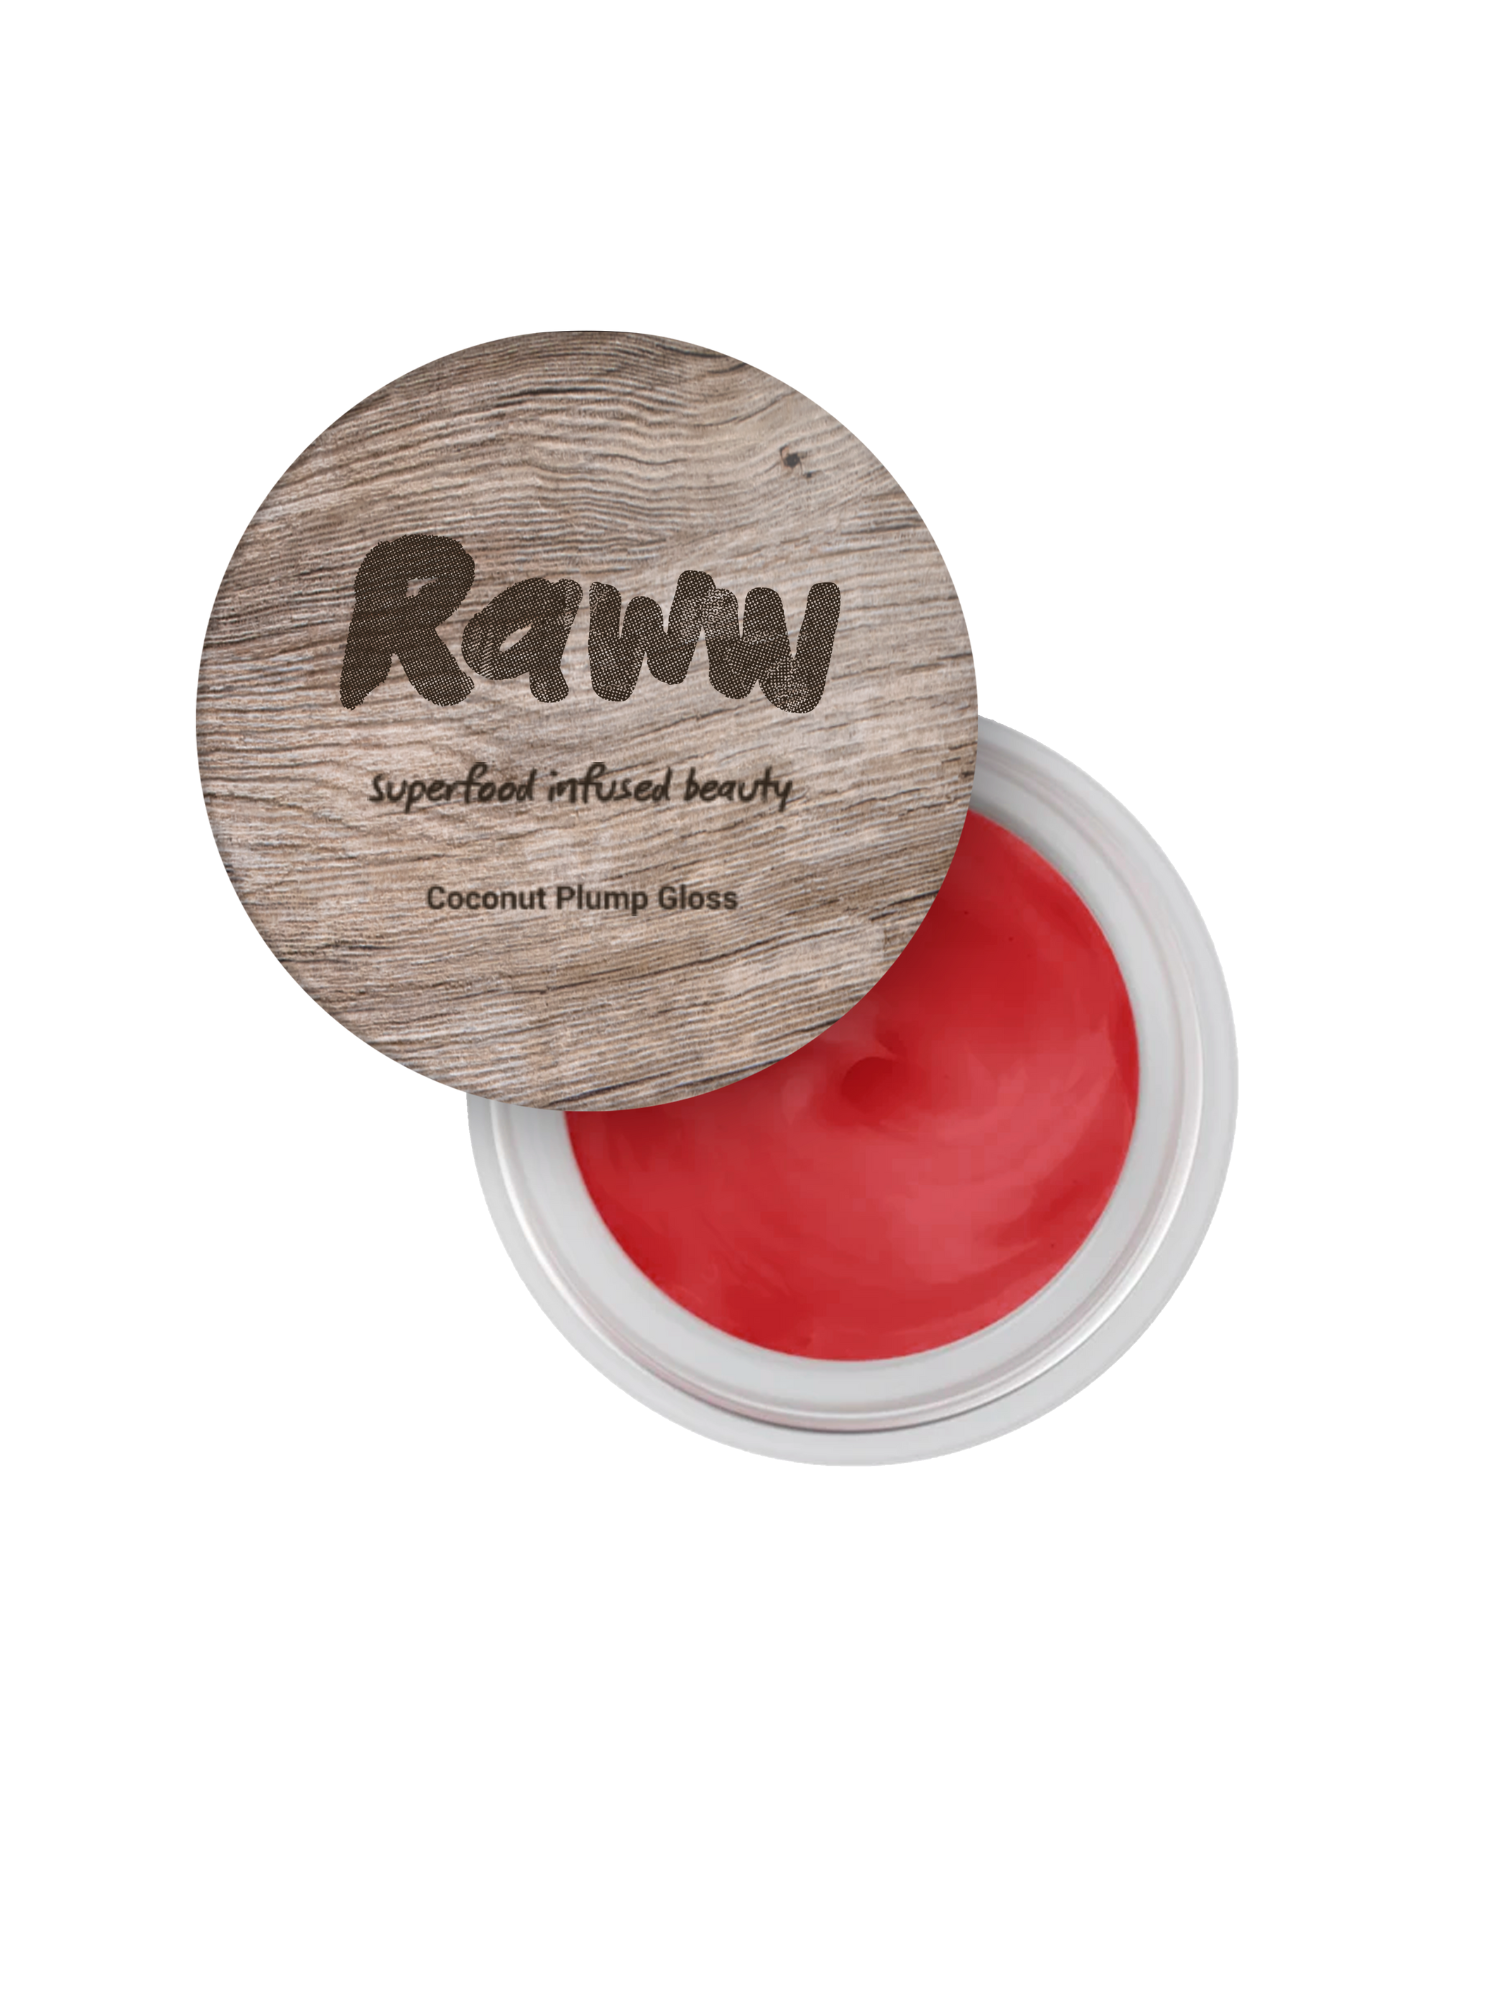 Coconut Plump Gloss in a Pot - Sweet Cherry